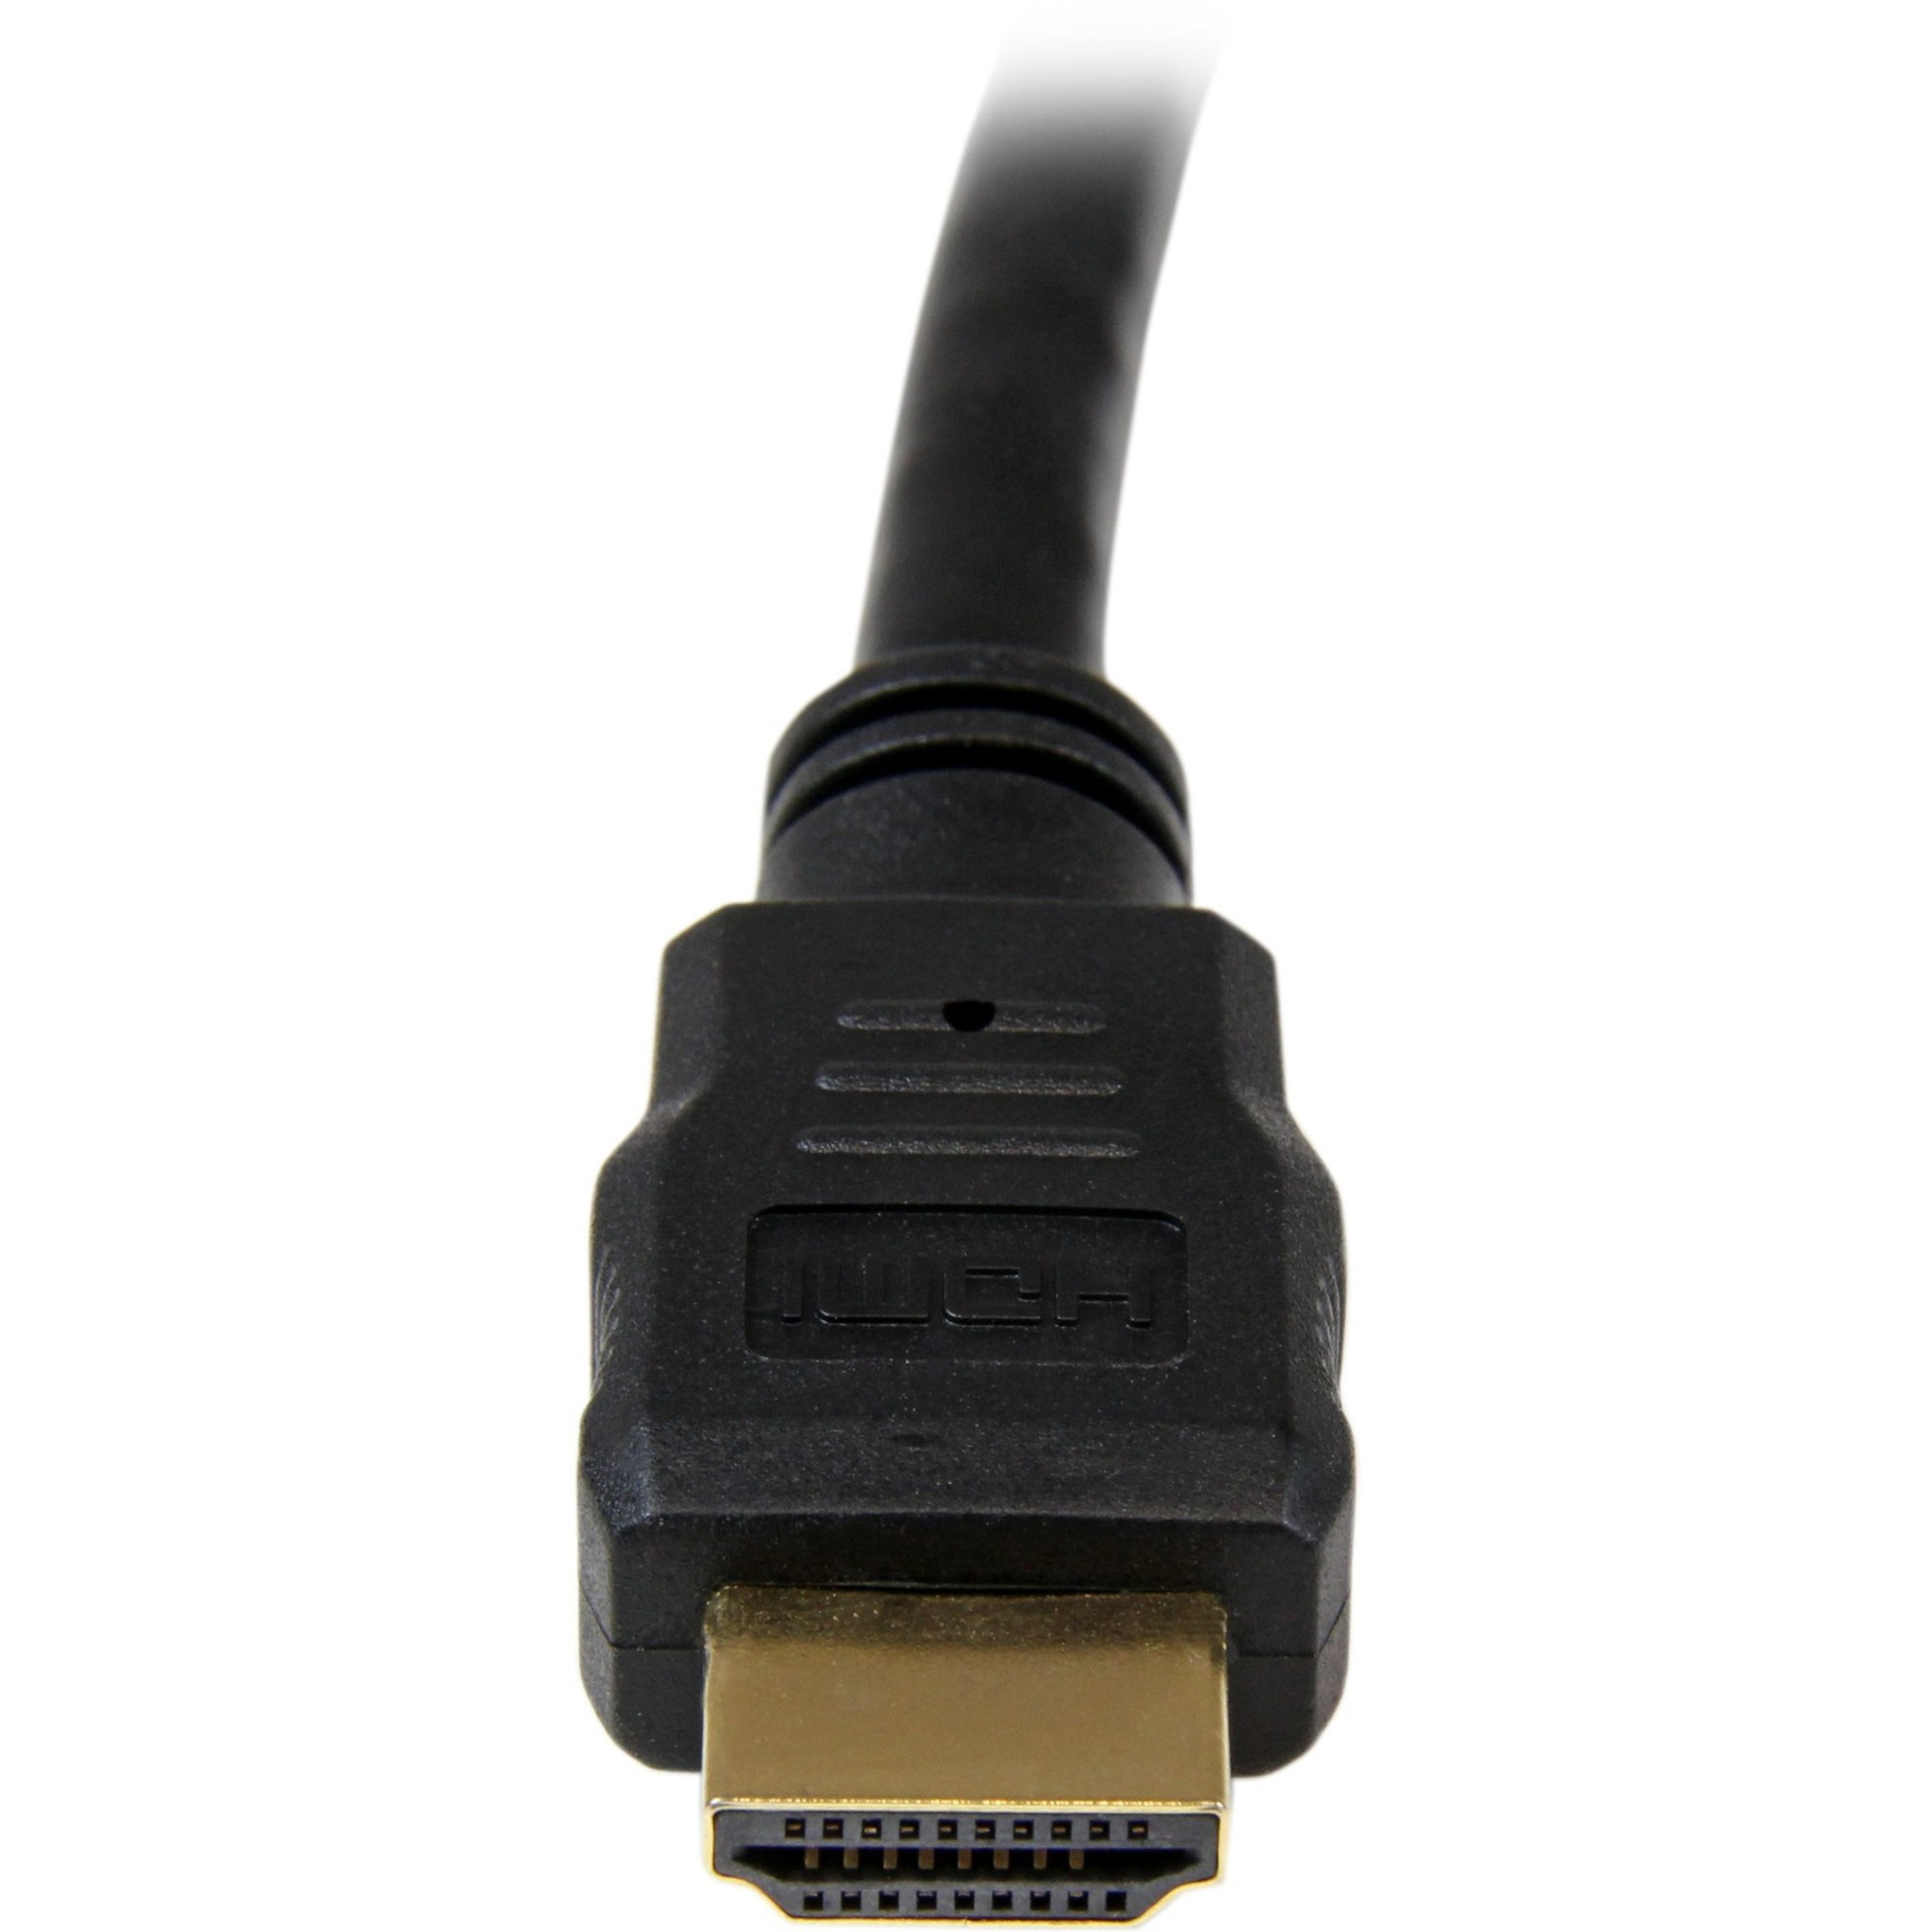 5m (16.4ft) HDMI Cable - 4K High Speed HDMI Cable with Ethernet - UHD 4K  30Hz Video - HDMI 1.4 Cable - Ultra HD HDMI Monitors, Projectors, TVs 